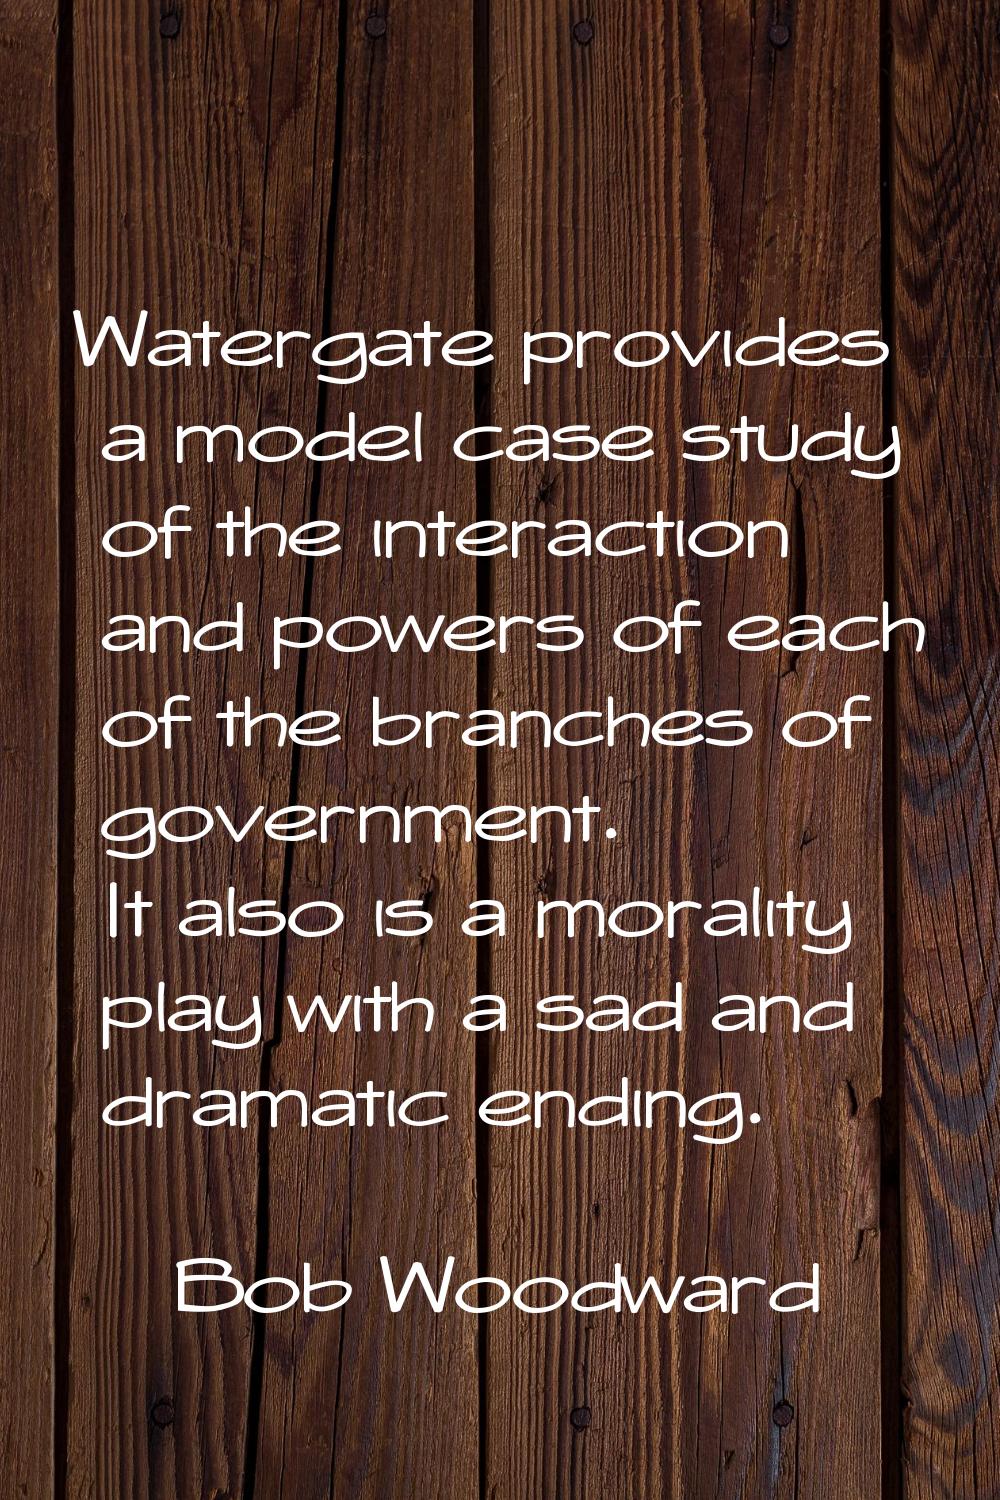 Watergate provides a model case study of the interaction and powers of each of the branches of gove